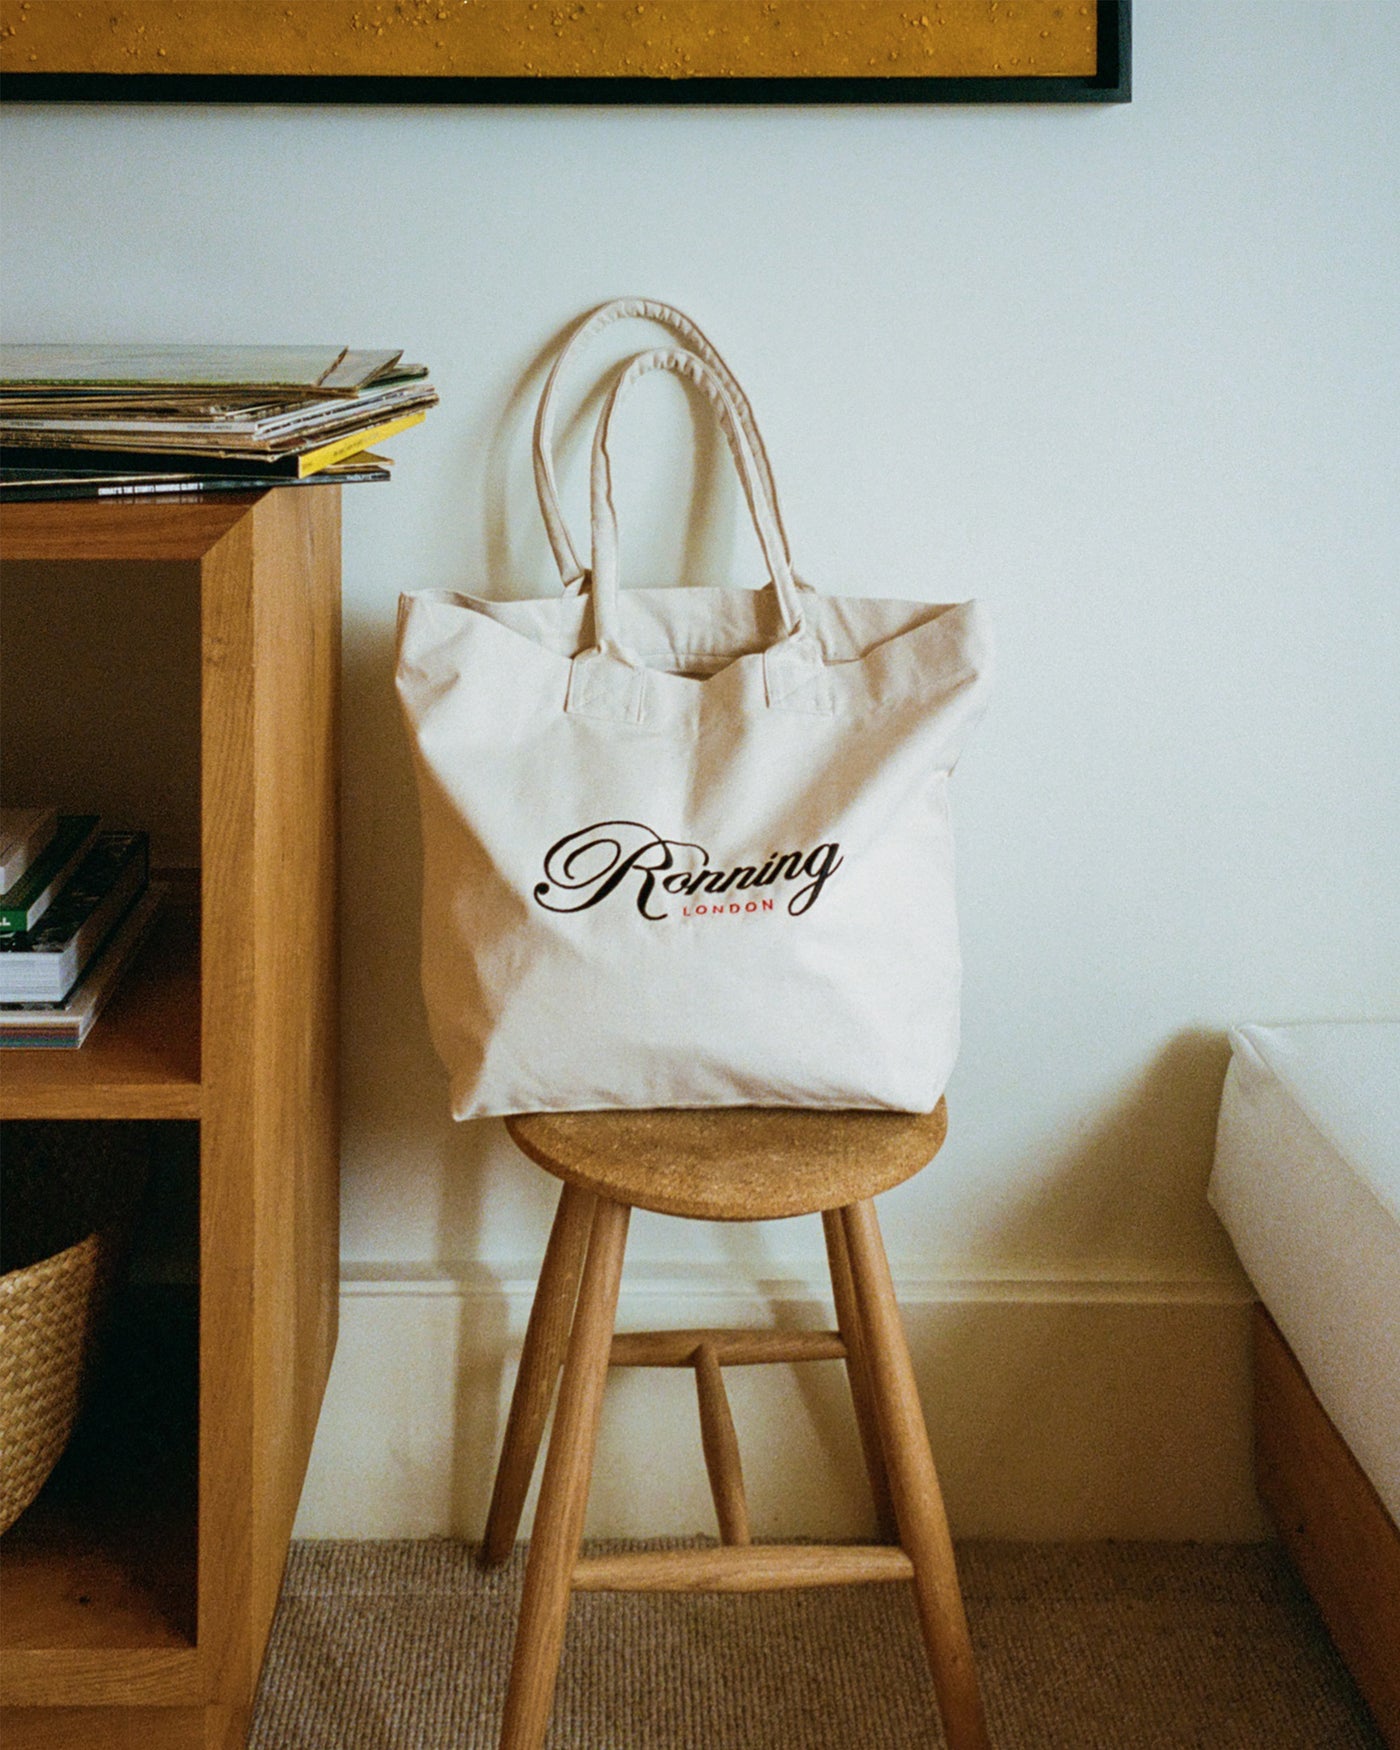 Everyday Canvas Tote Bag - Stone